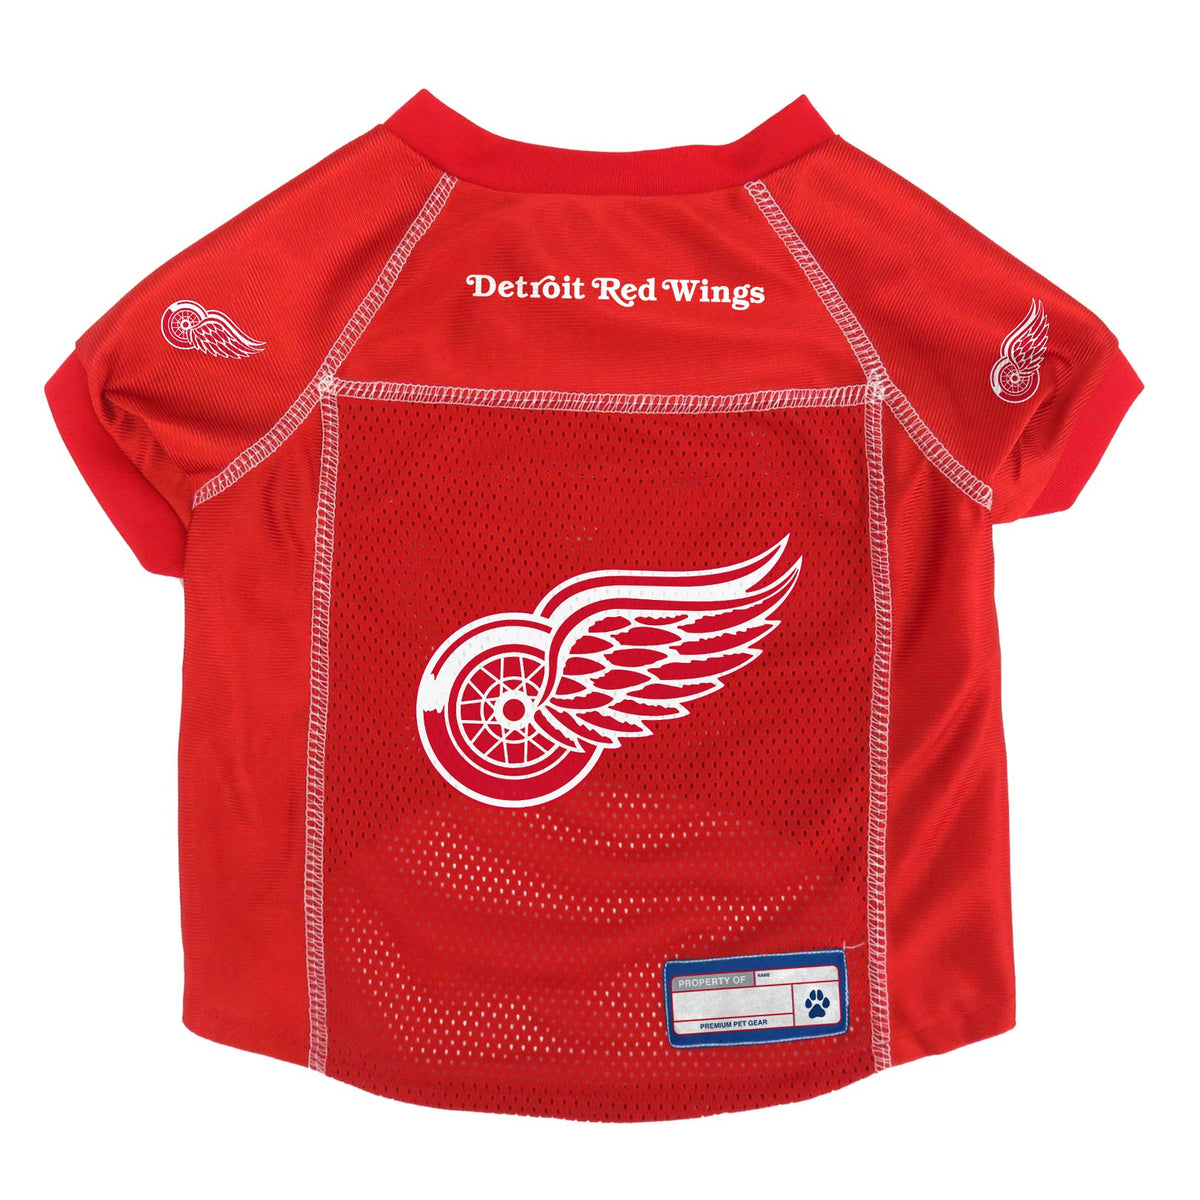 Vintage Detroit Red Wings Jersey Size Youth Small -  Singapore